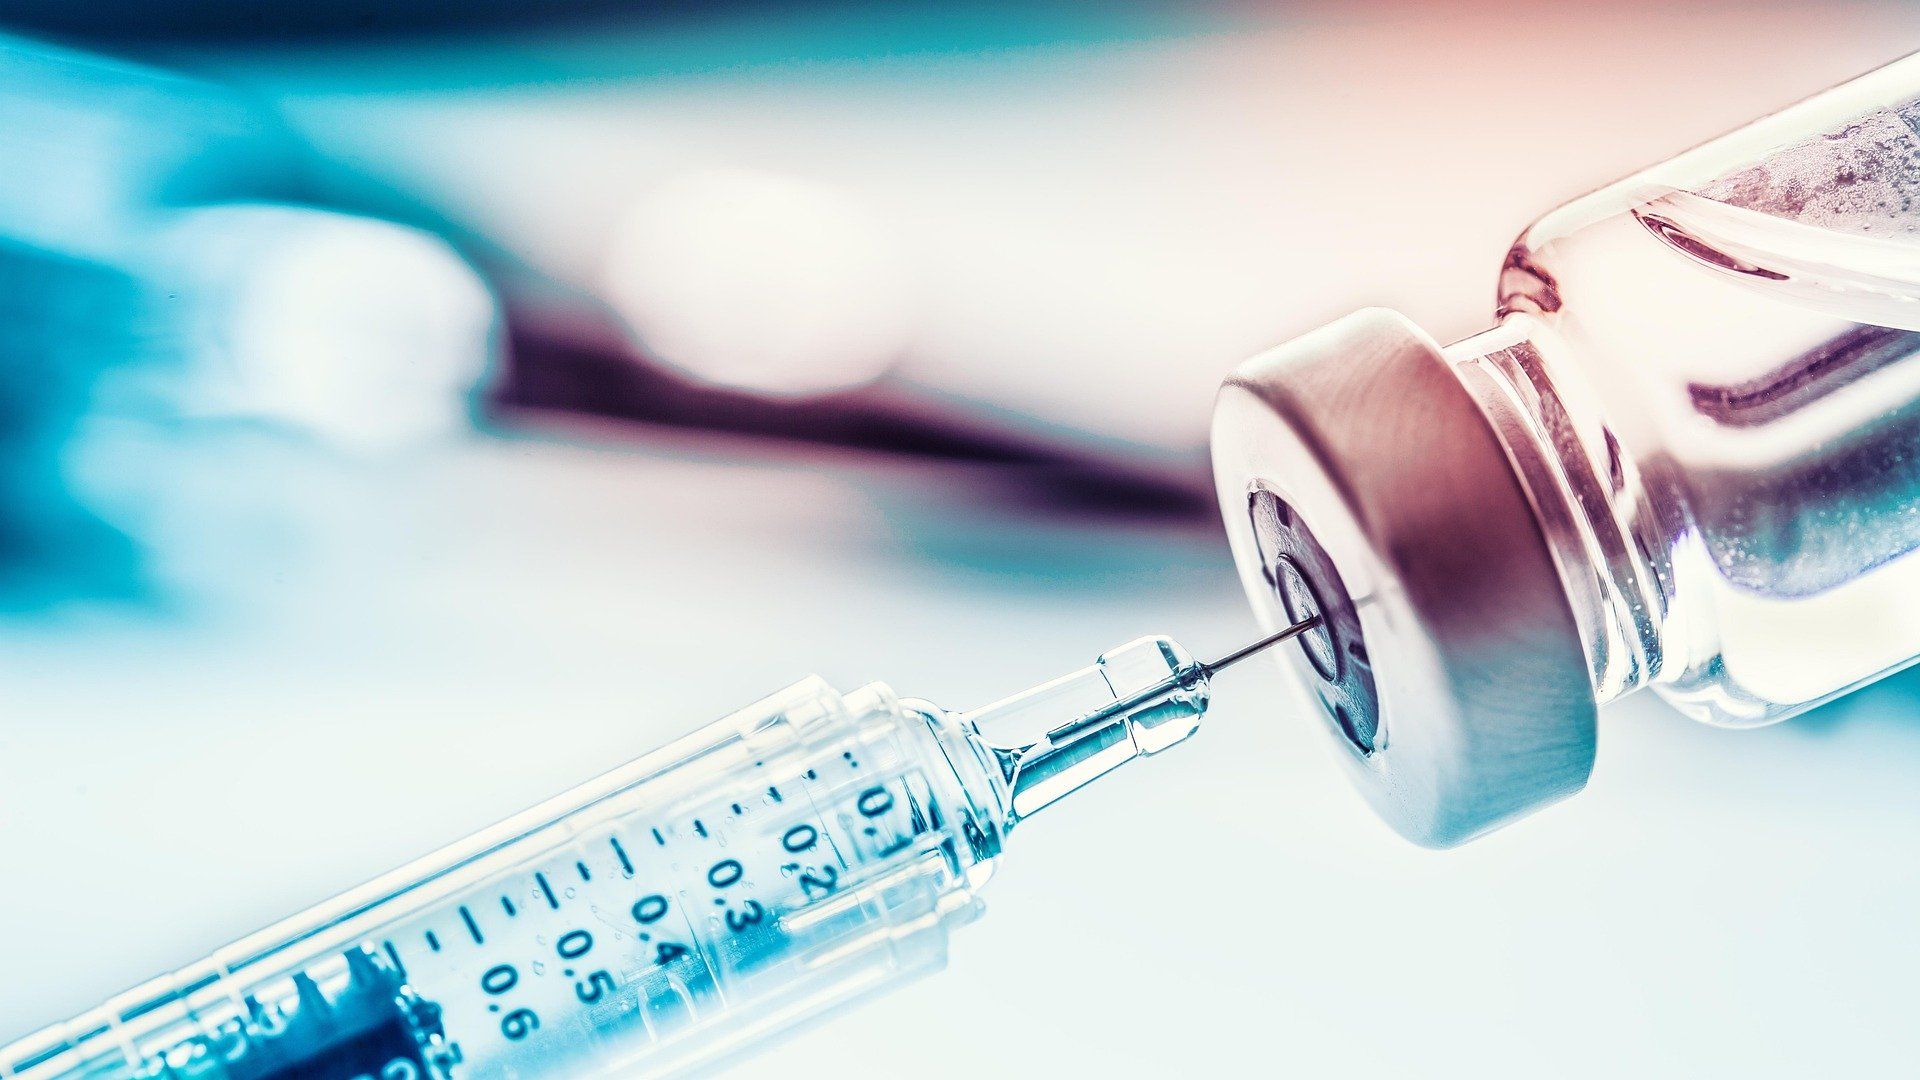 Cyberattacks detected on COVID-19 vaccine distribution operations